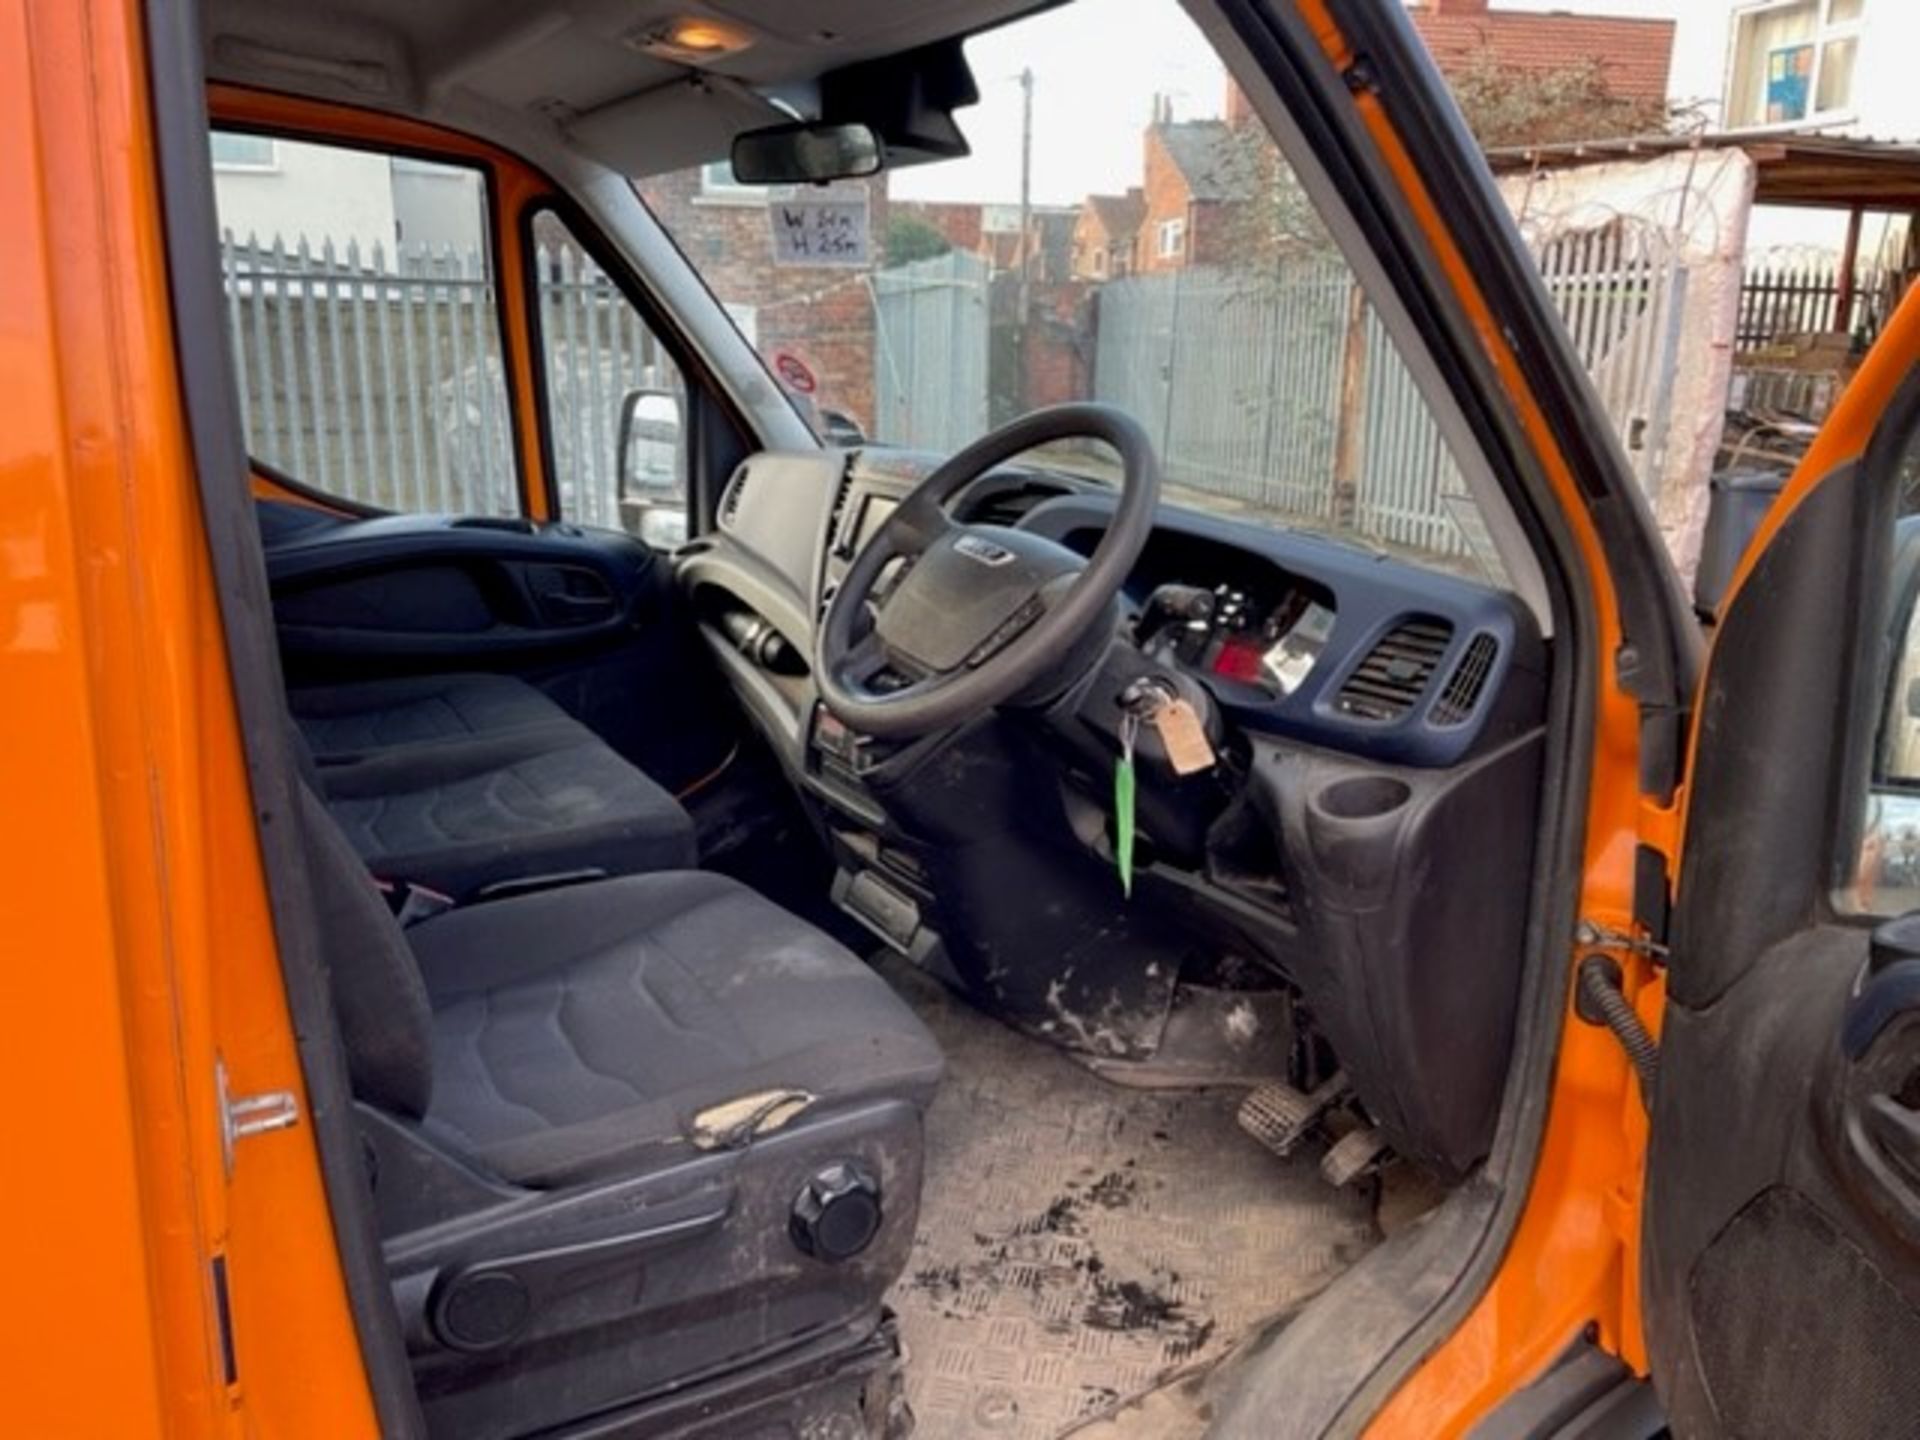 *Iveco Daily 5ton 180 Auto Tipper, Reg: NX18 OMA, 3810 engine hours, Mileage 126,911 - Image 6 of 10